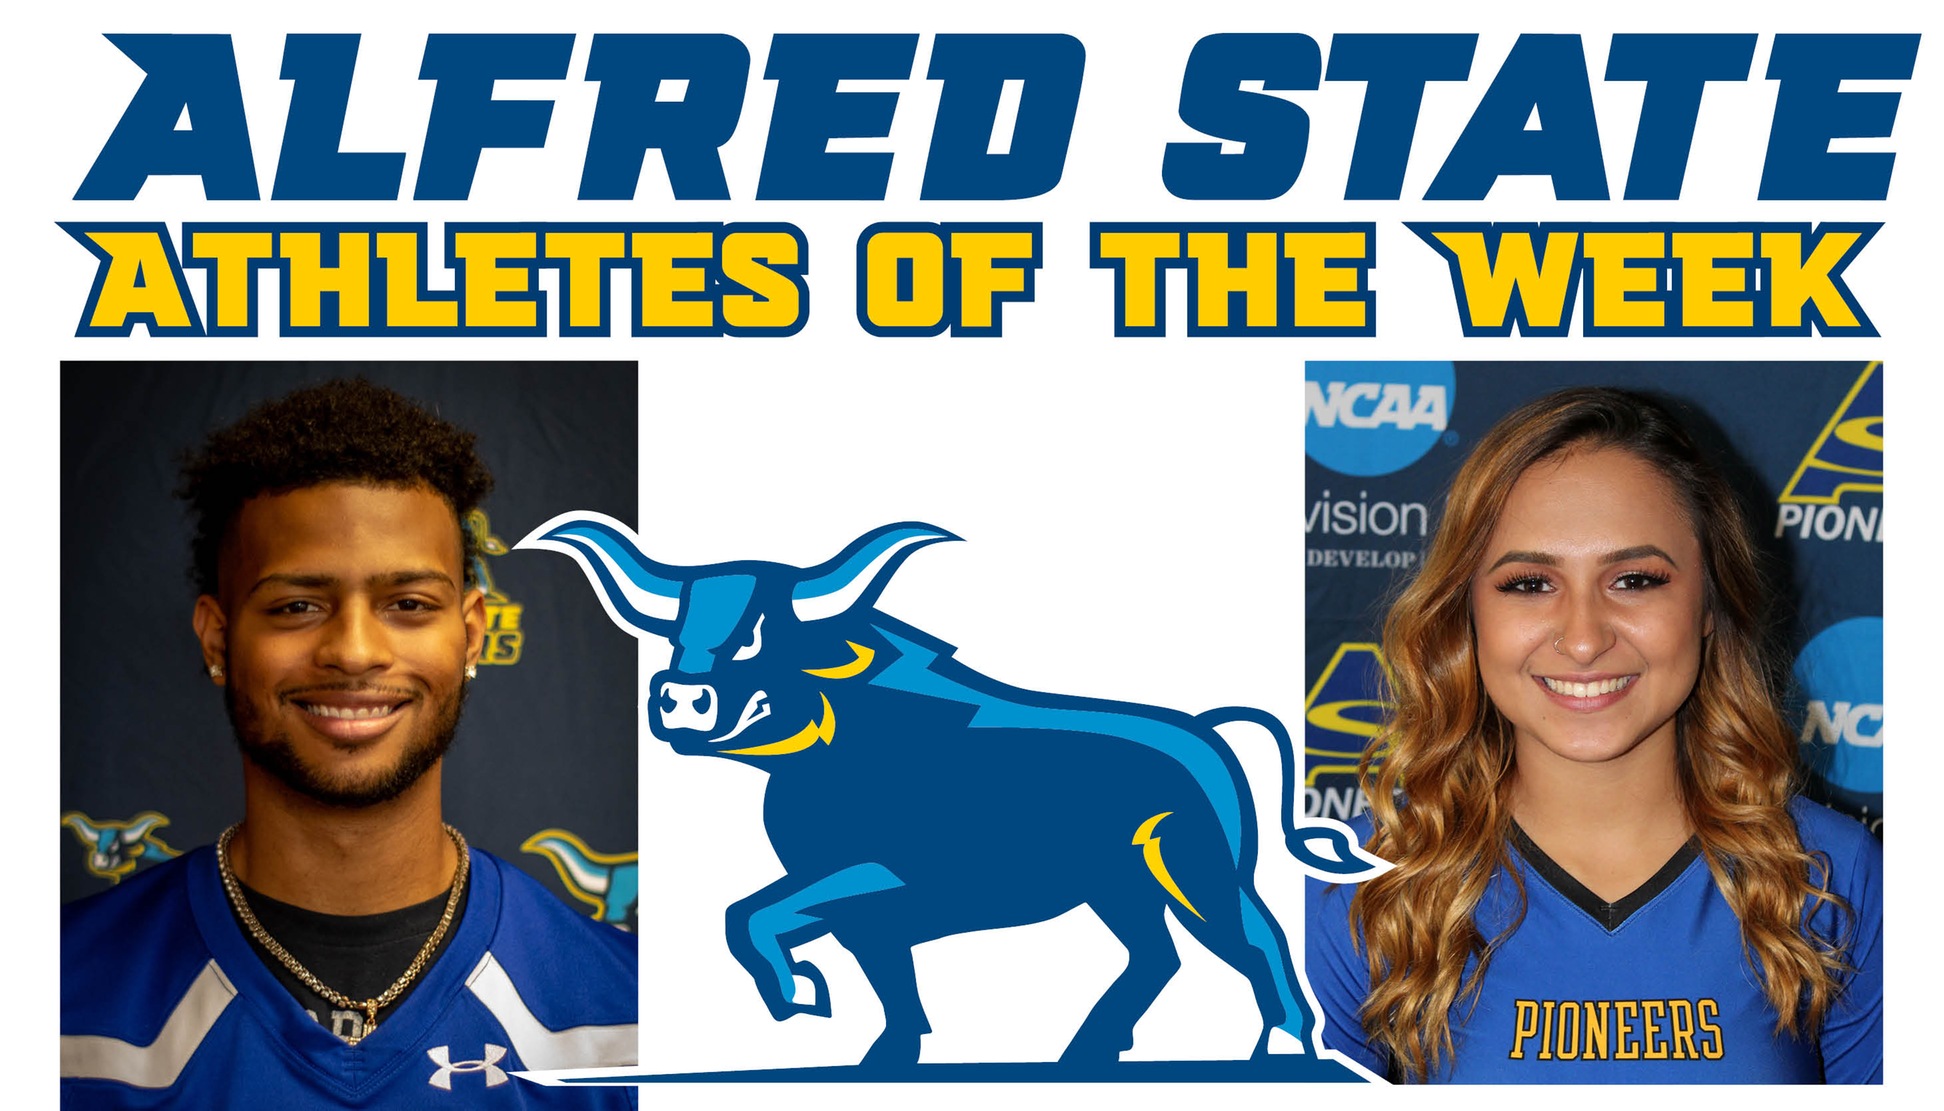 Jalen Long and Madison Webster named Athletes of the Week - 9/4